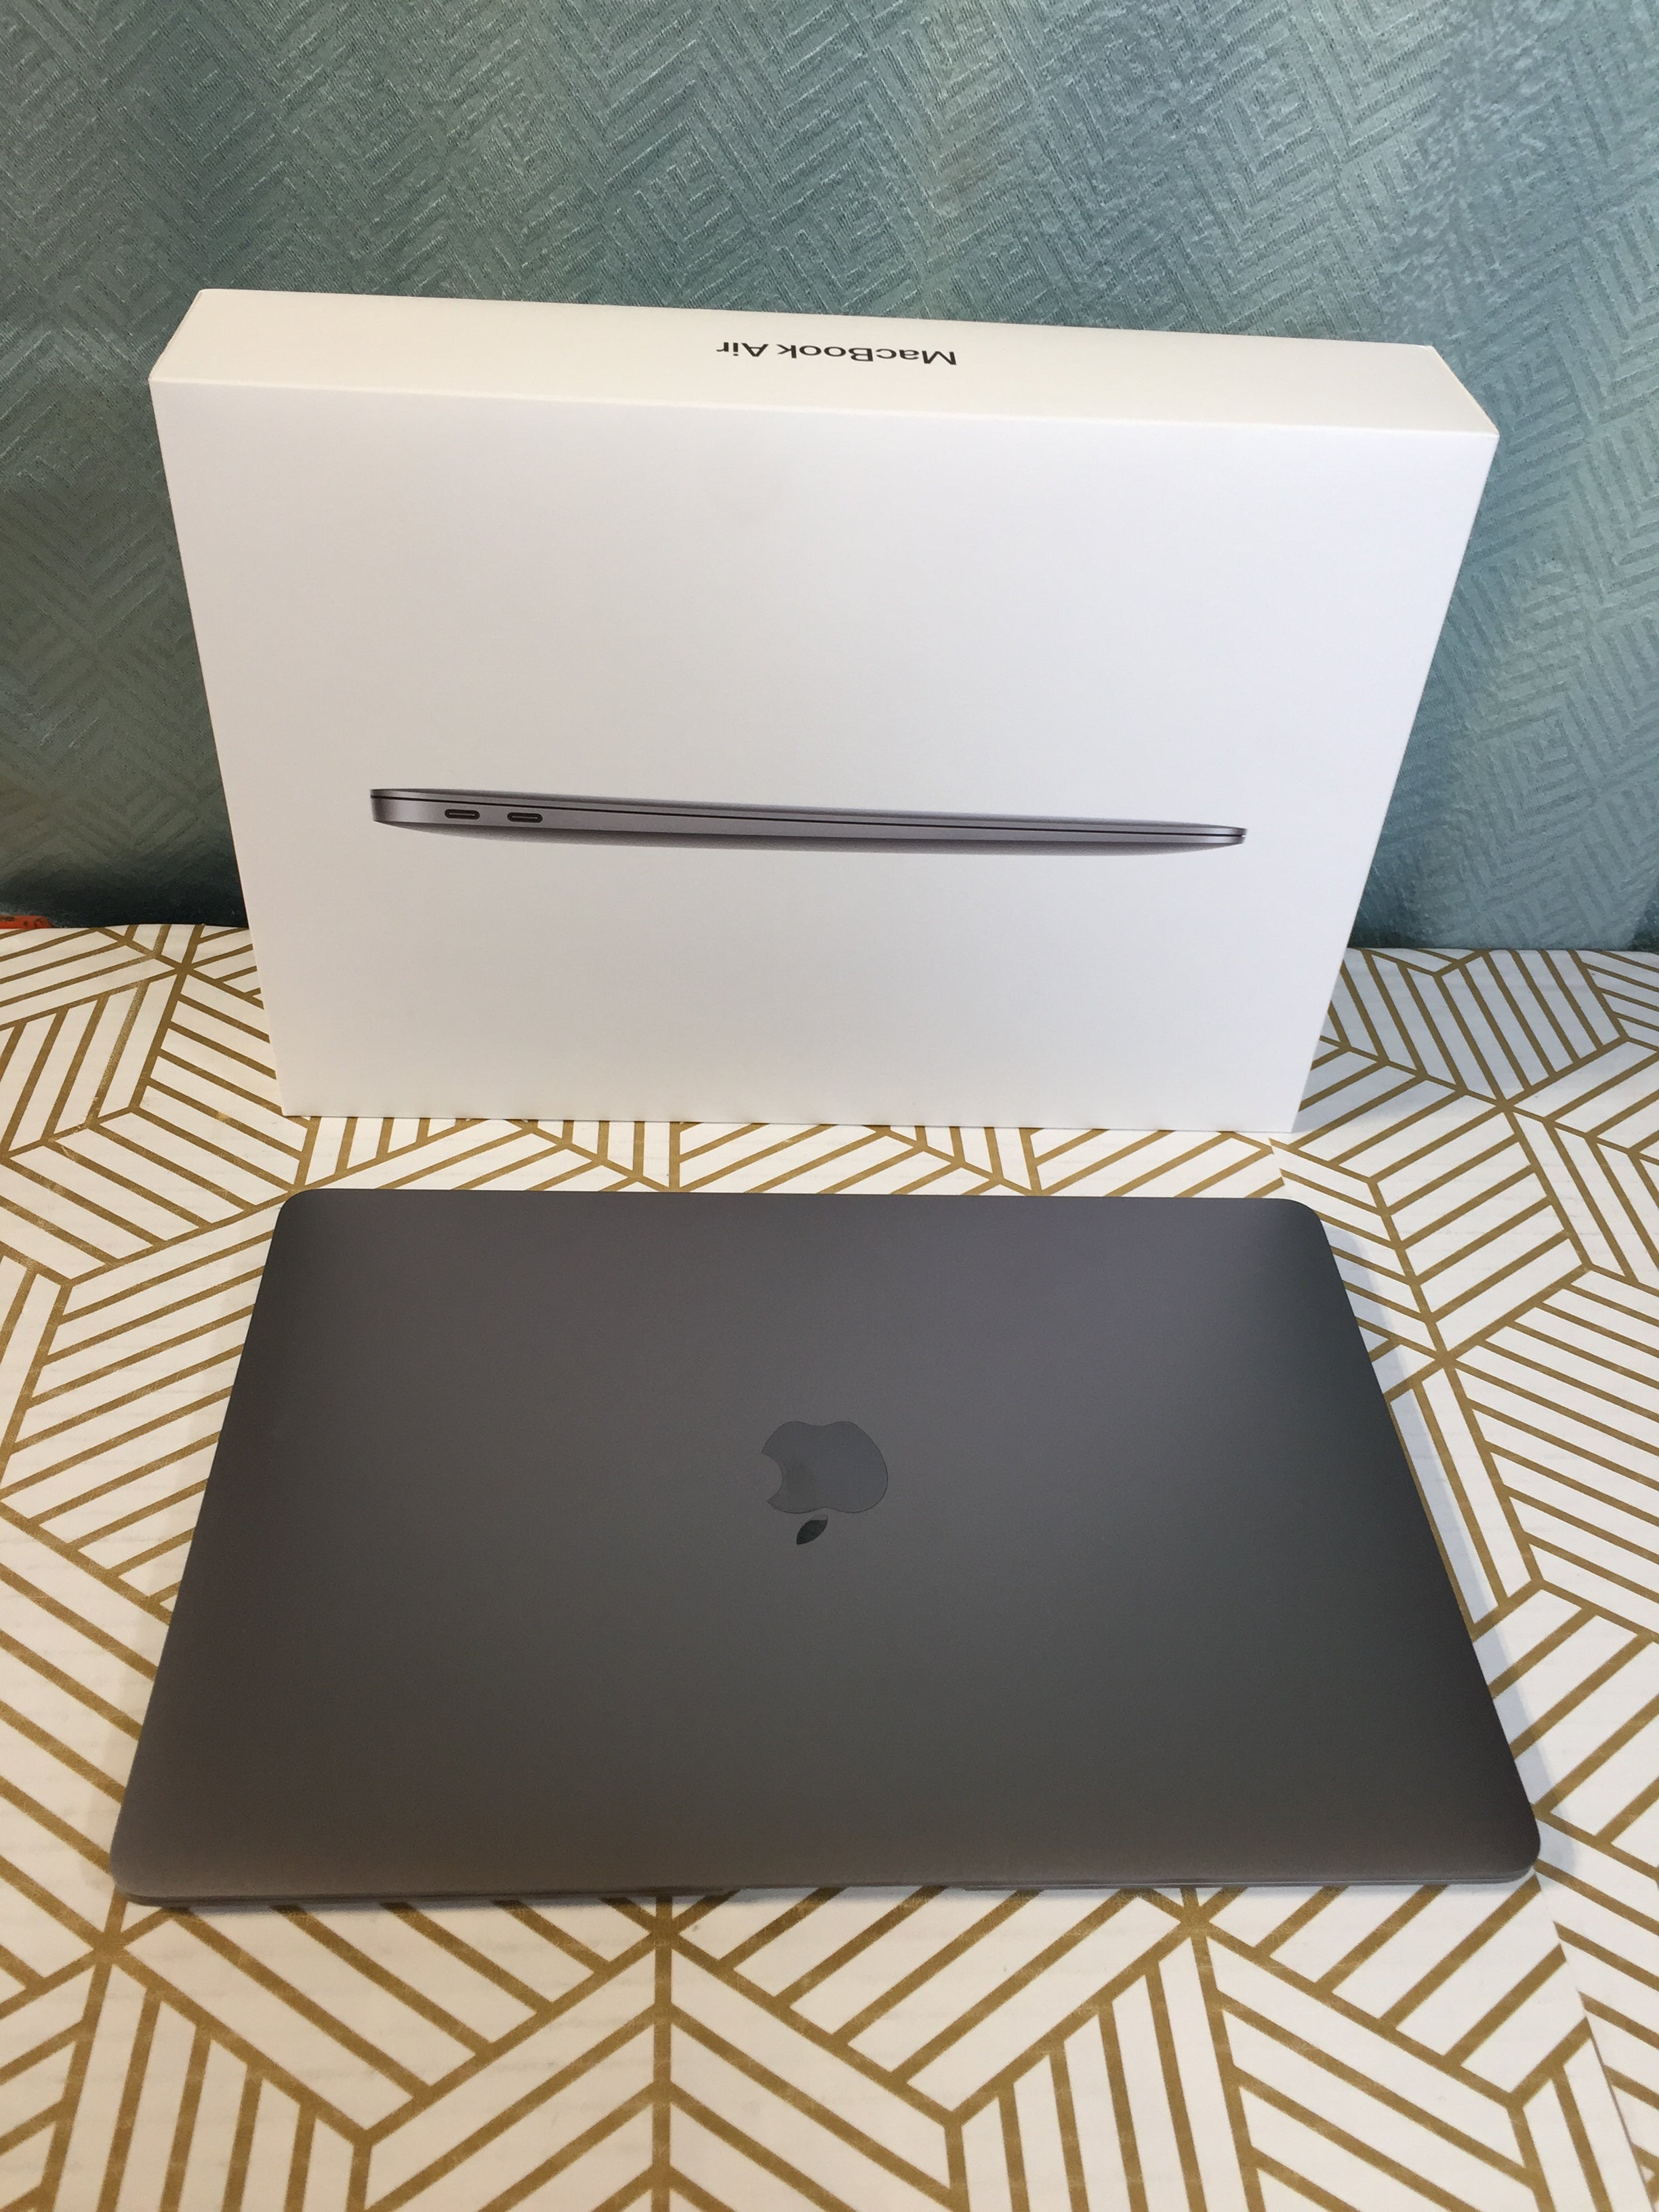 2020 Apple MacBook Air Laptop: Apple M1 Chip, 13” Retina Display, 8GB RAM, 256GB SSD Storage, Backlit Keyboard, FaceTime HD Camera, Touch ID. Works with iPhone/iPad; Space Gray (7746537980142)